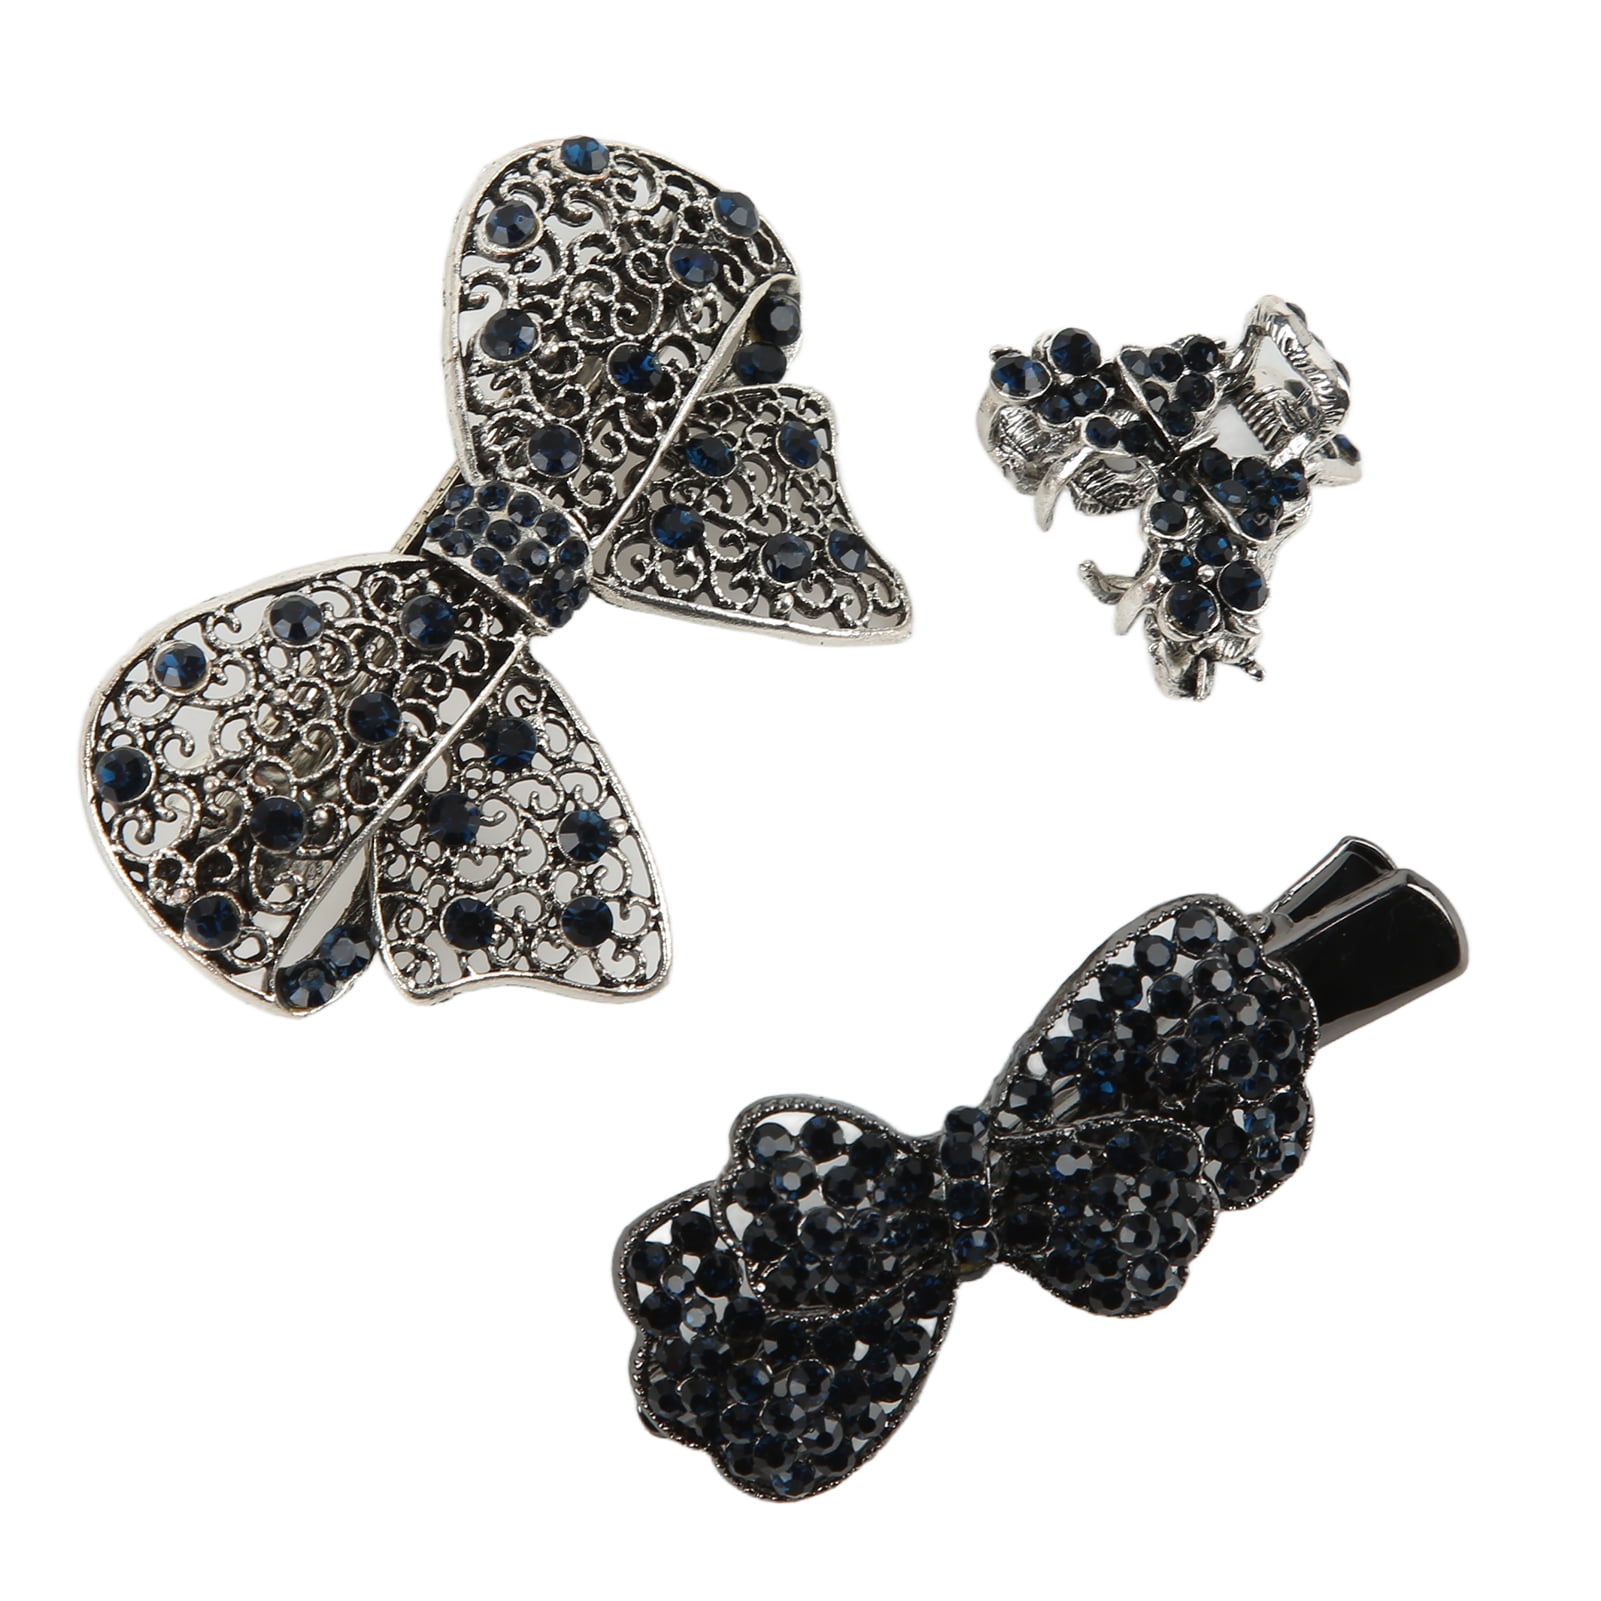 Spptty Bow Hairpin Set Alloy Materials Retro Exquisite Elegant Beautiful  Handcrafted Hair Clip Accessories,Hair Accessories 